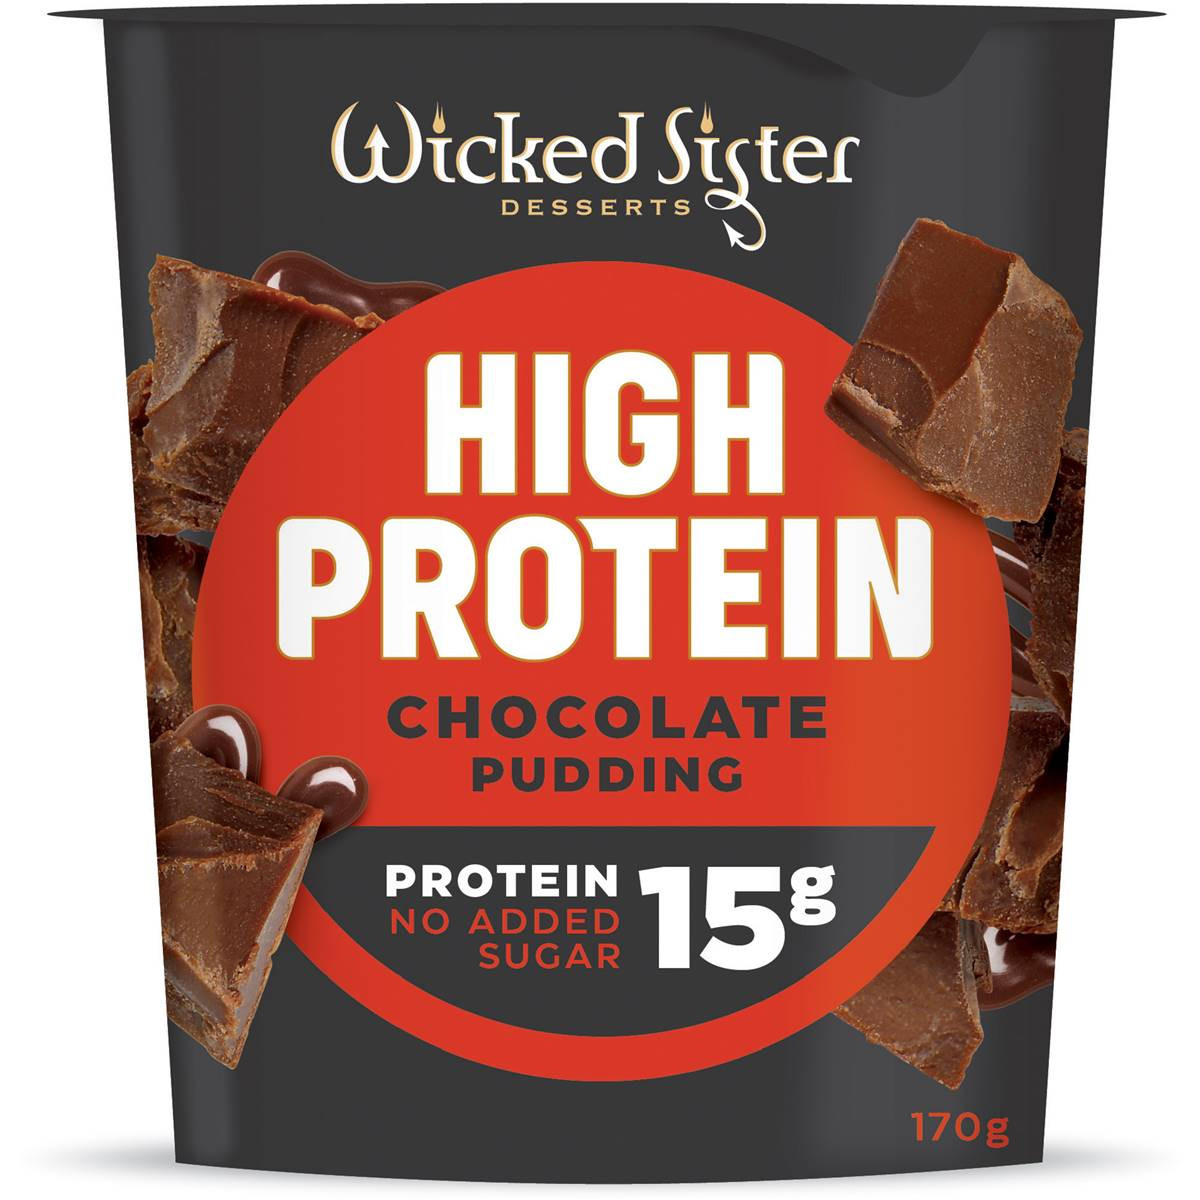 Wicked Sister High Protein Chocolate Pudding 170g